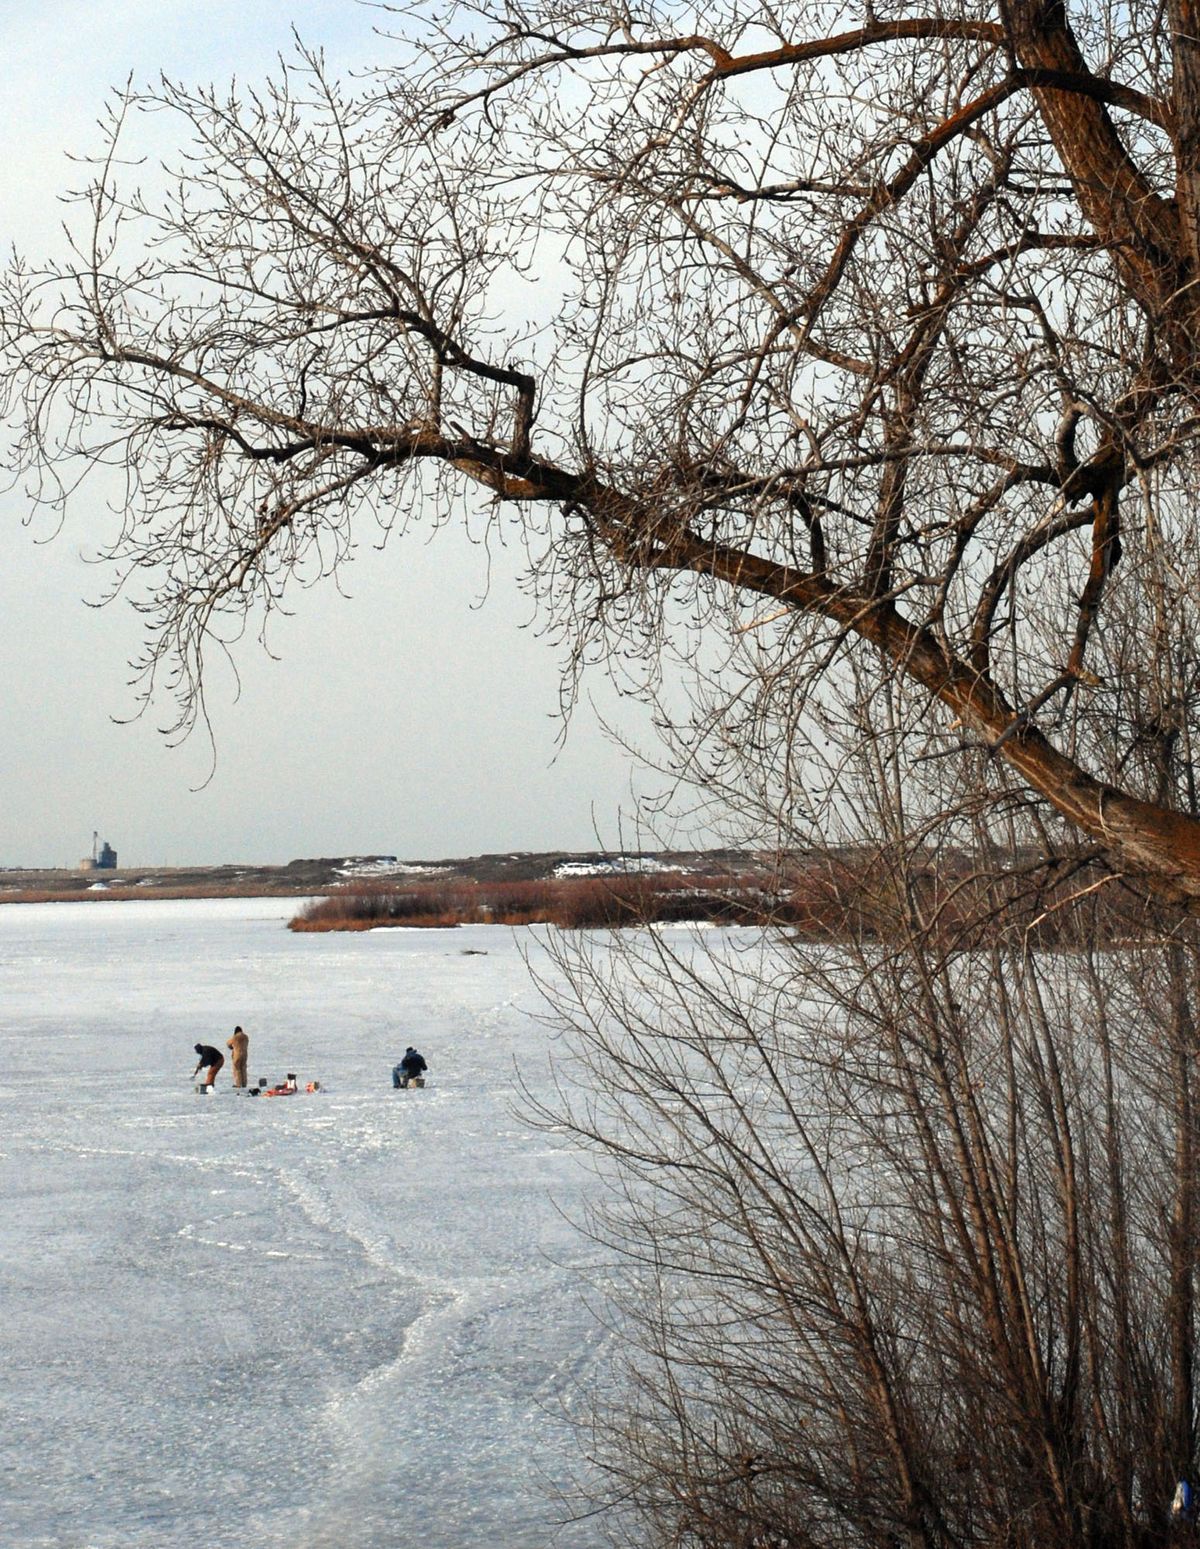 Fishermen trek out on the ice on a cold January day to try ice fishing at Sprague Lake.  (Rich Landers / The Spokesman-Review)